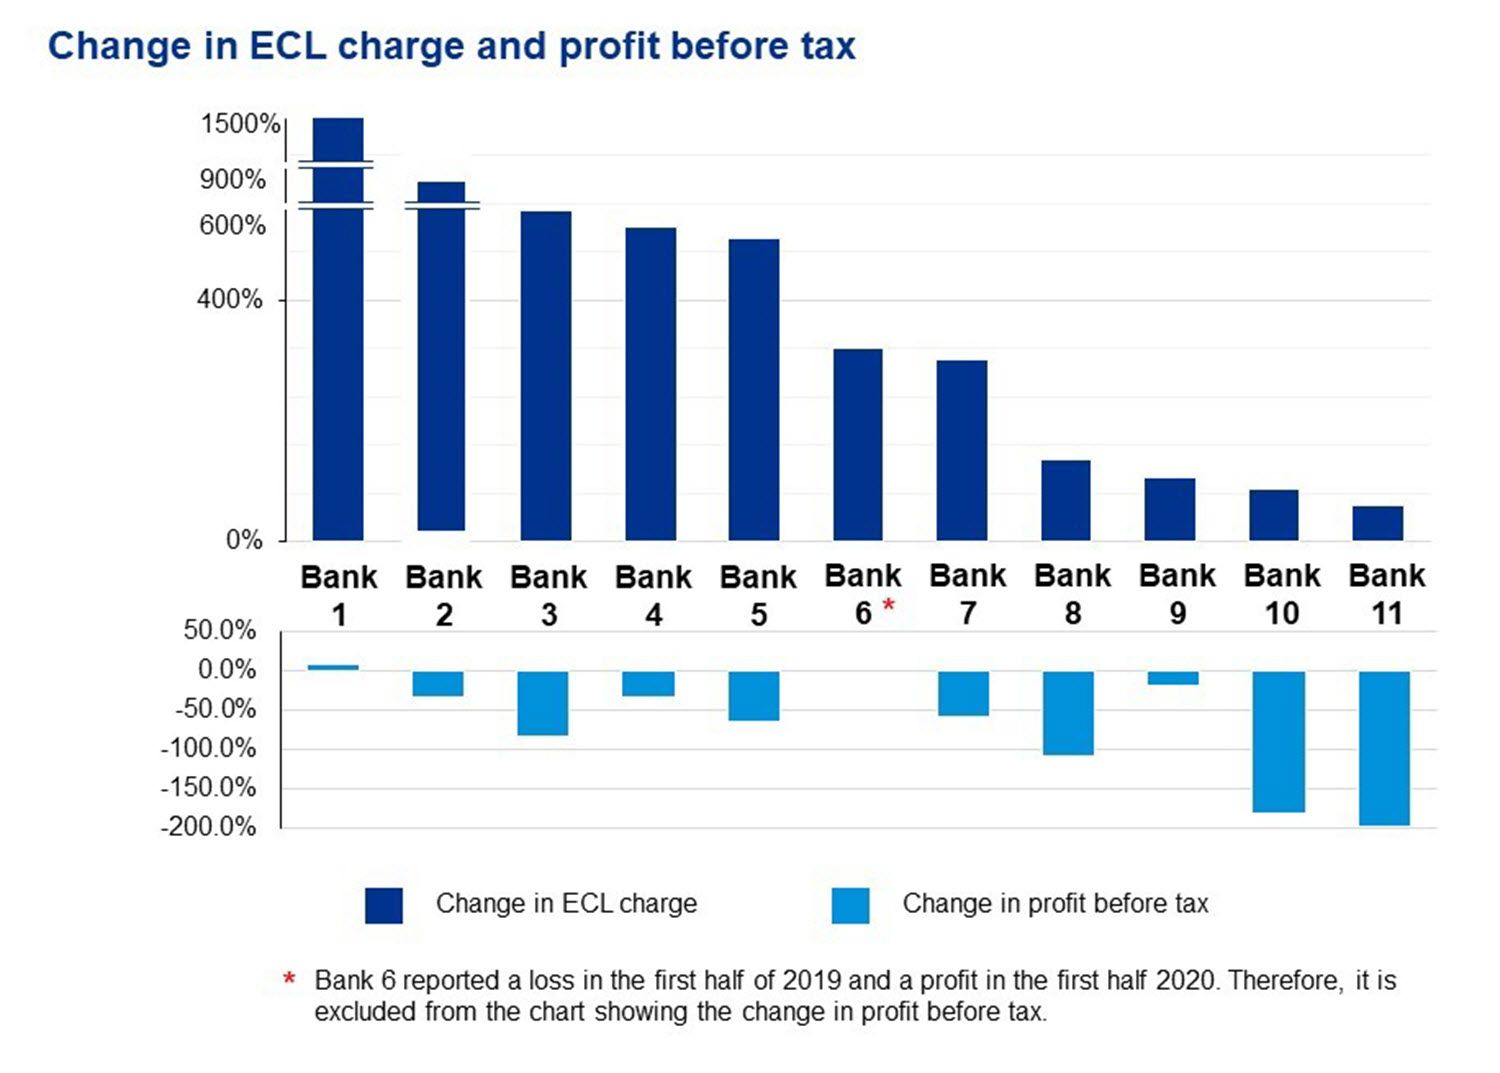 Changes in ECL charge and profit before tax